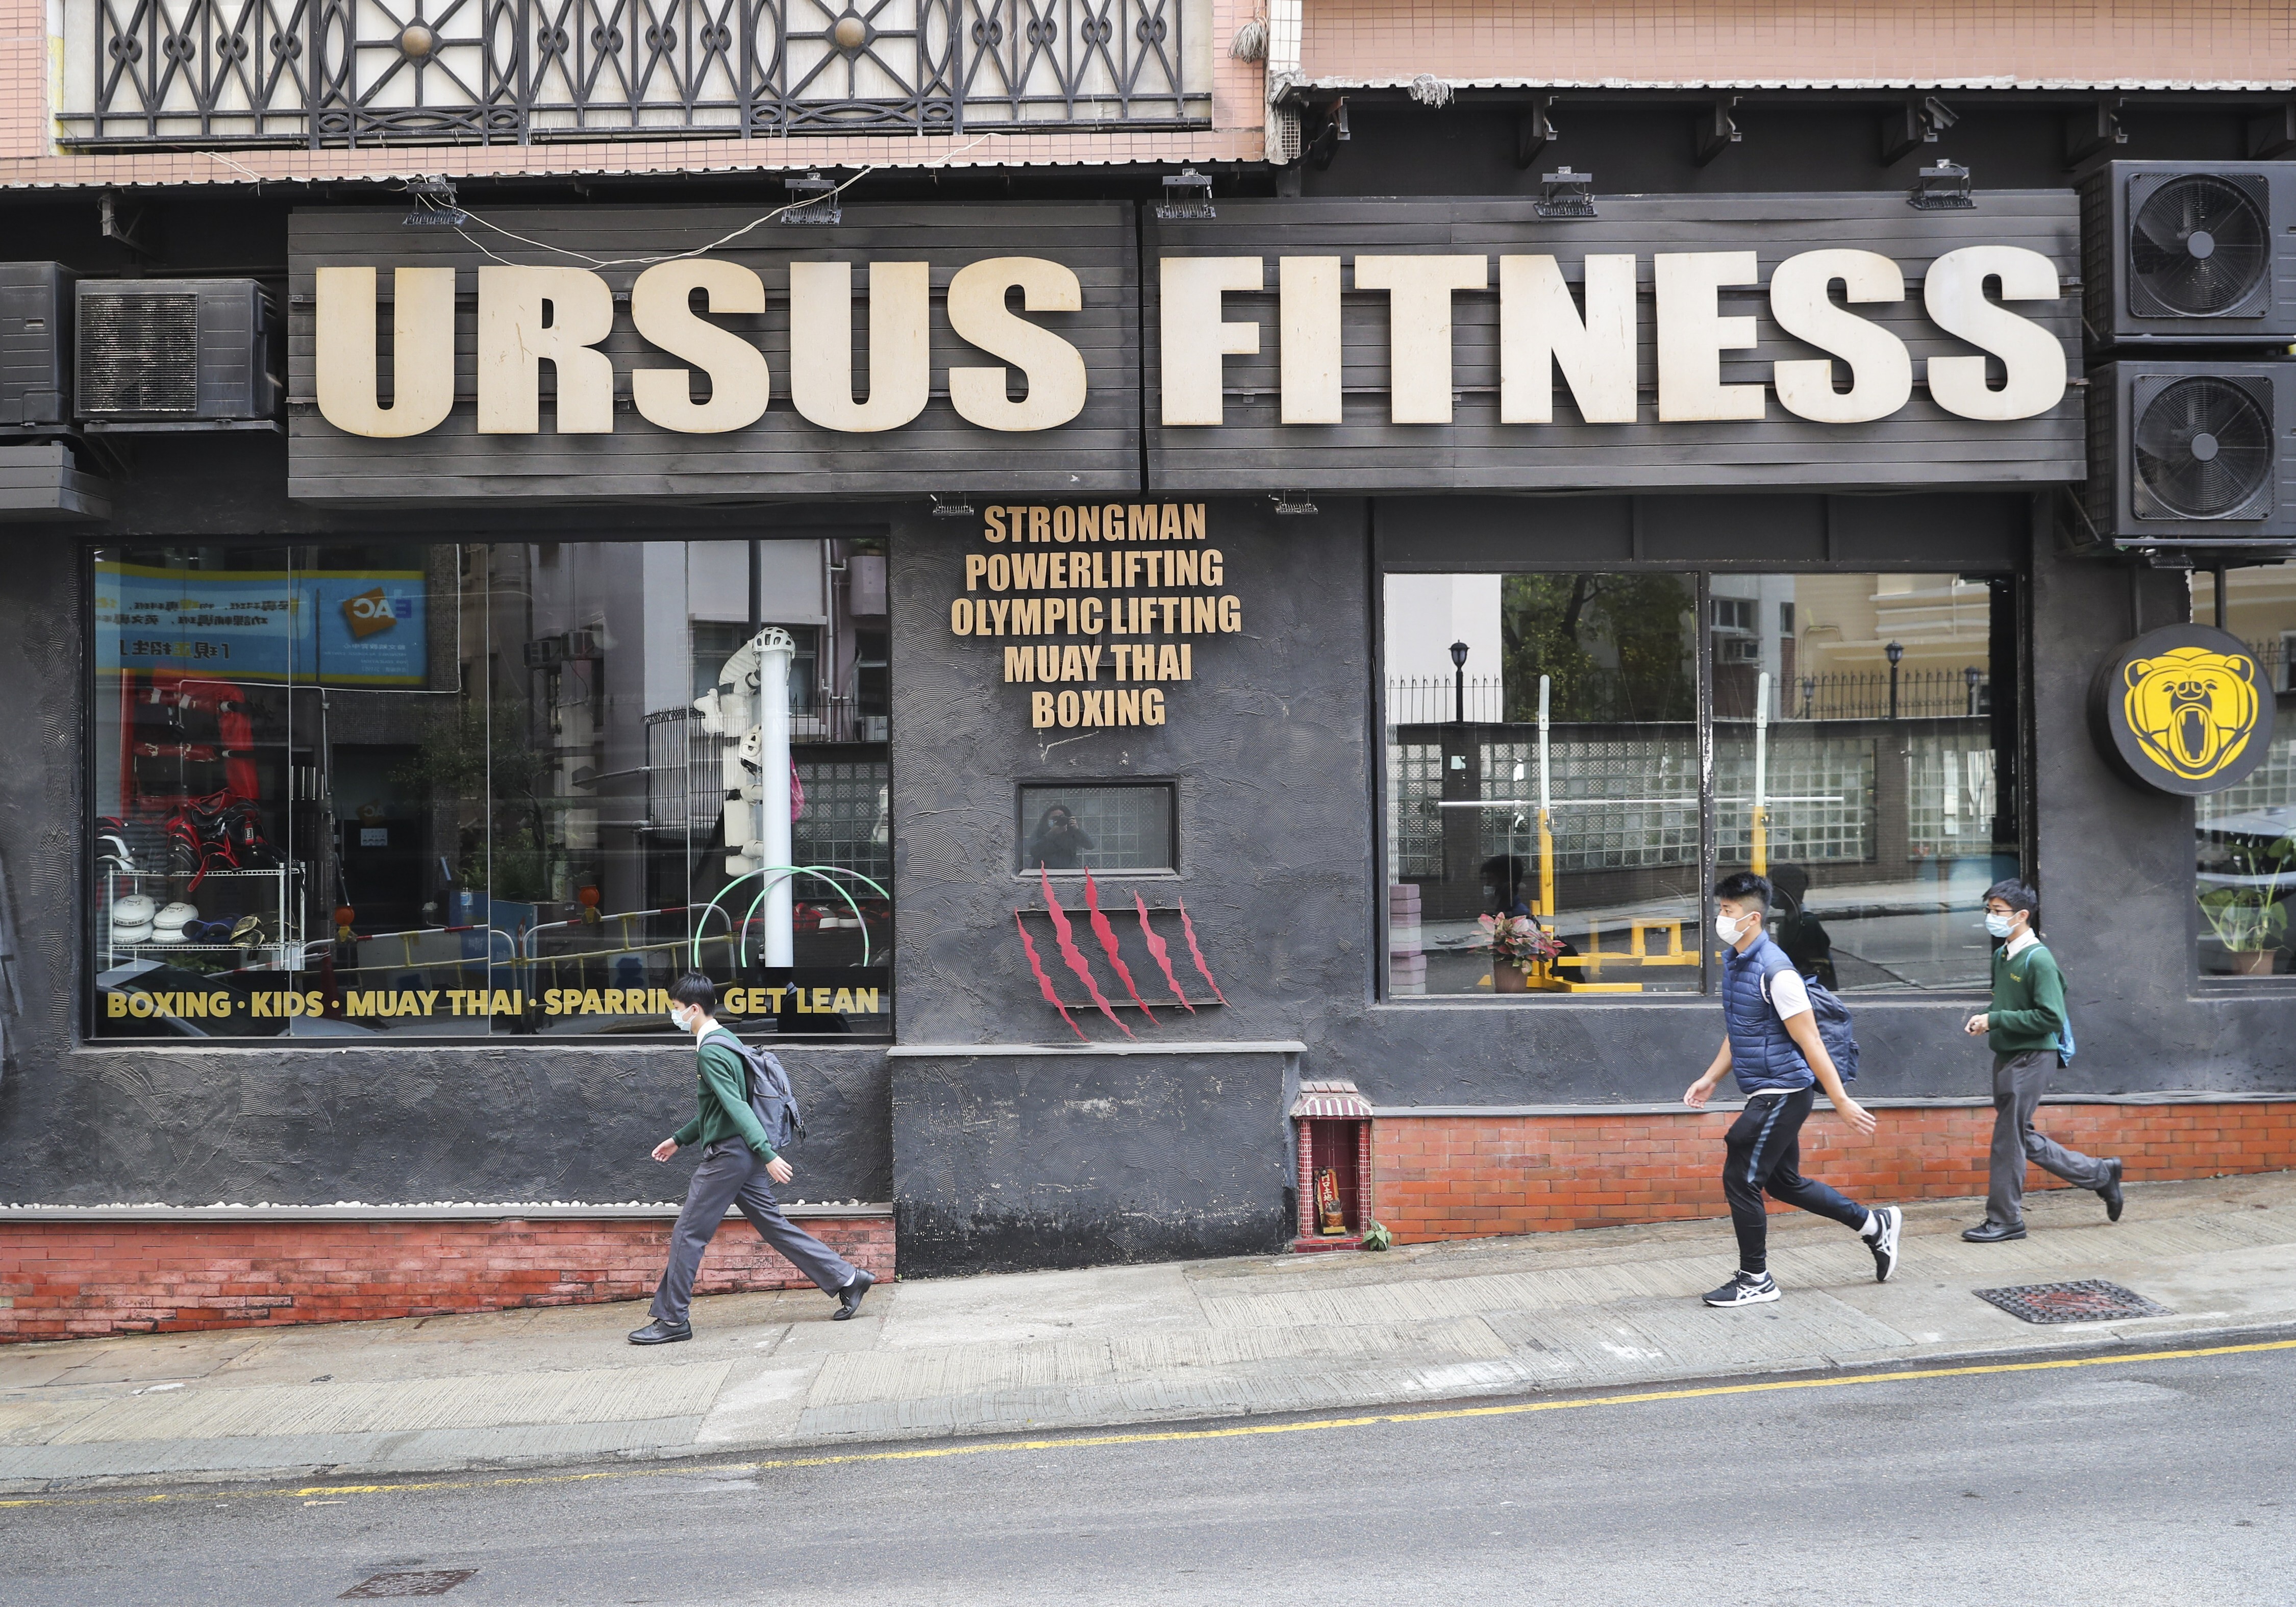 Ursus Fitness in Pok Fu Lam was closed after many confirmed Covid-19 cases were tied to the gym. Photo: SCMP / Edmond So